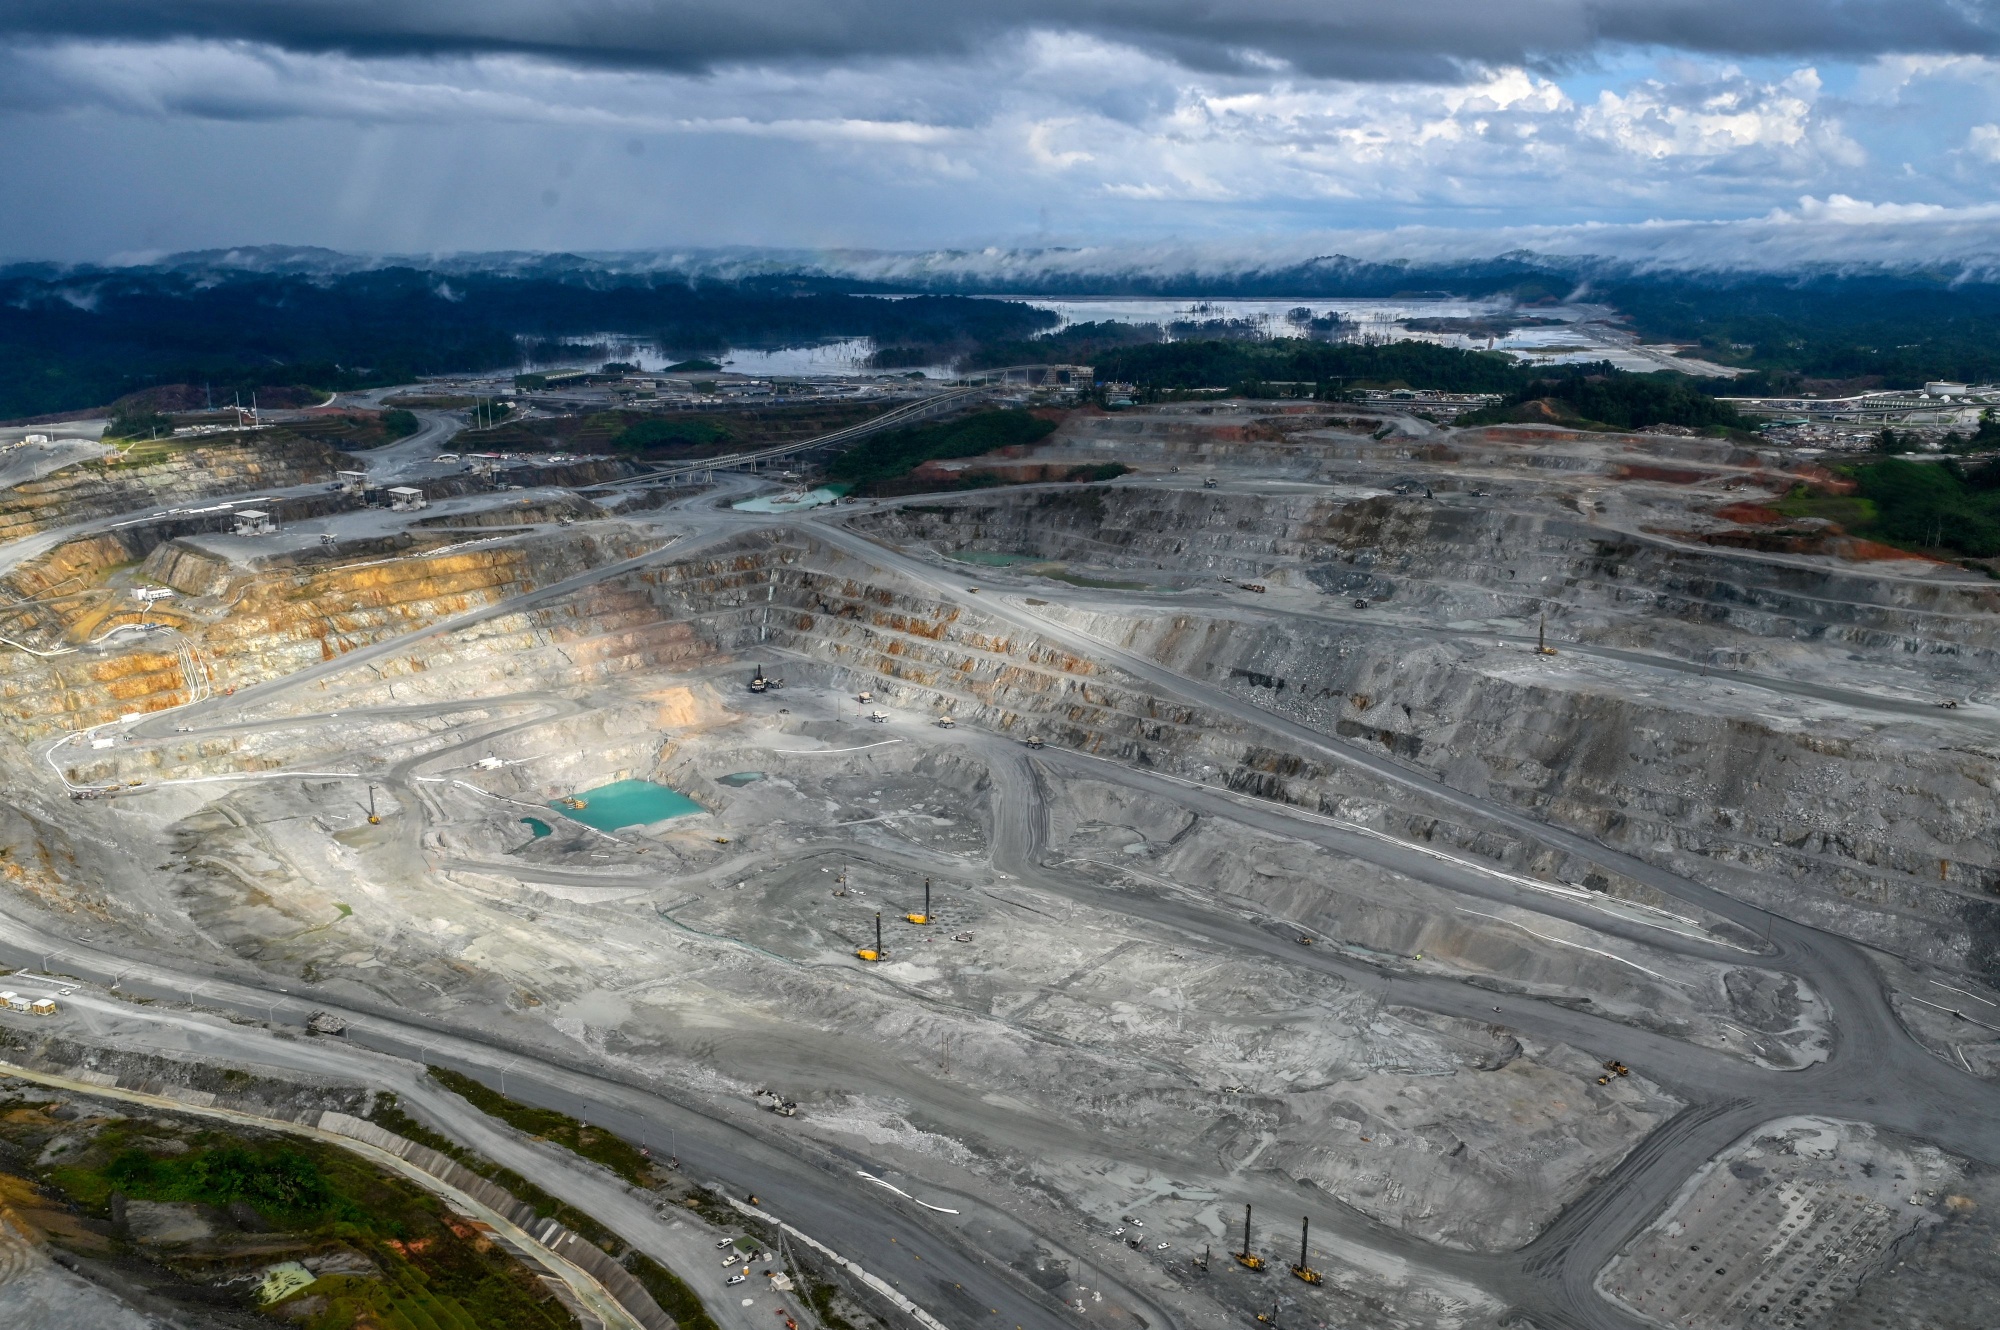 The Cobre Panama mine was set to be the centerpiece of Panama’s economy, generating between four and five percent of its gross domestic product.